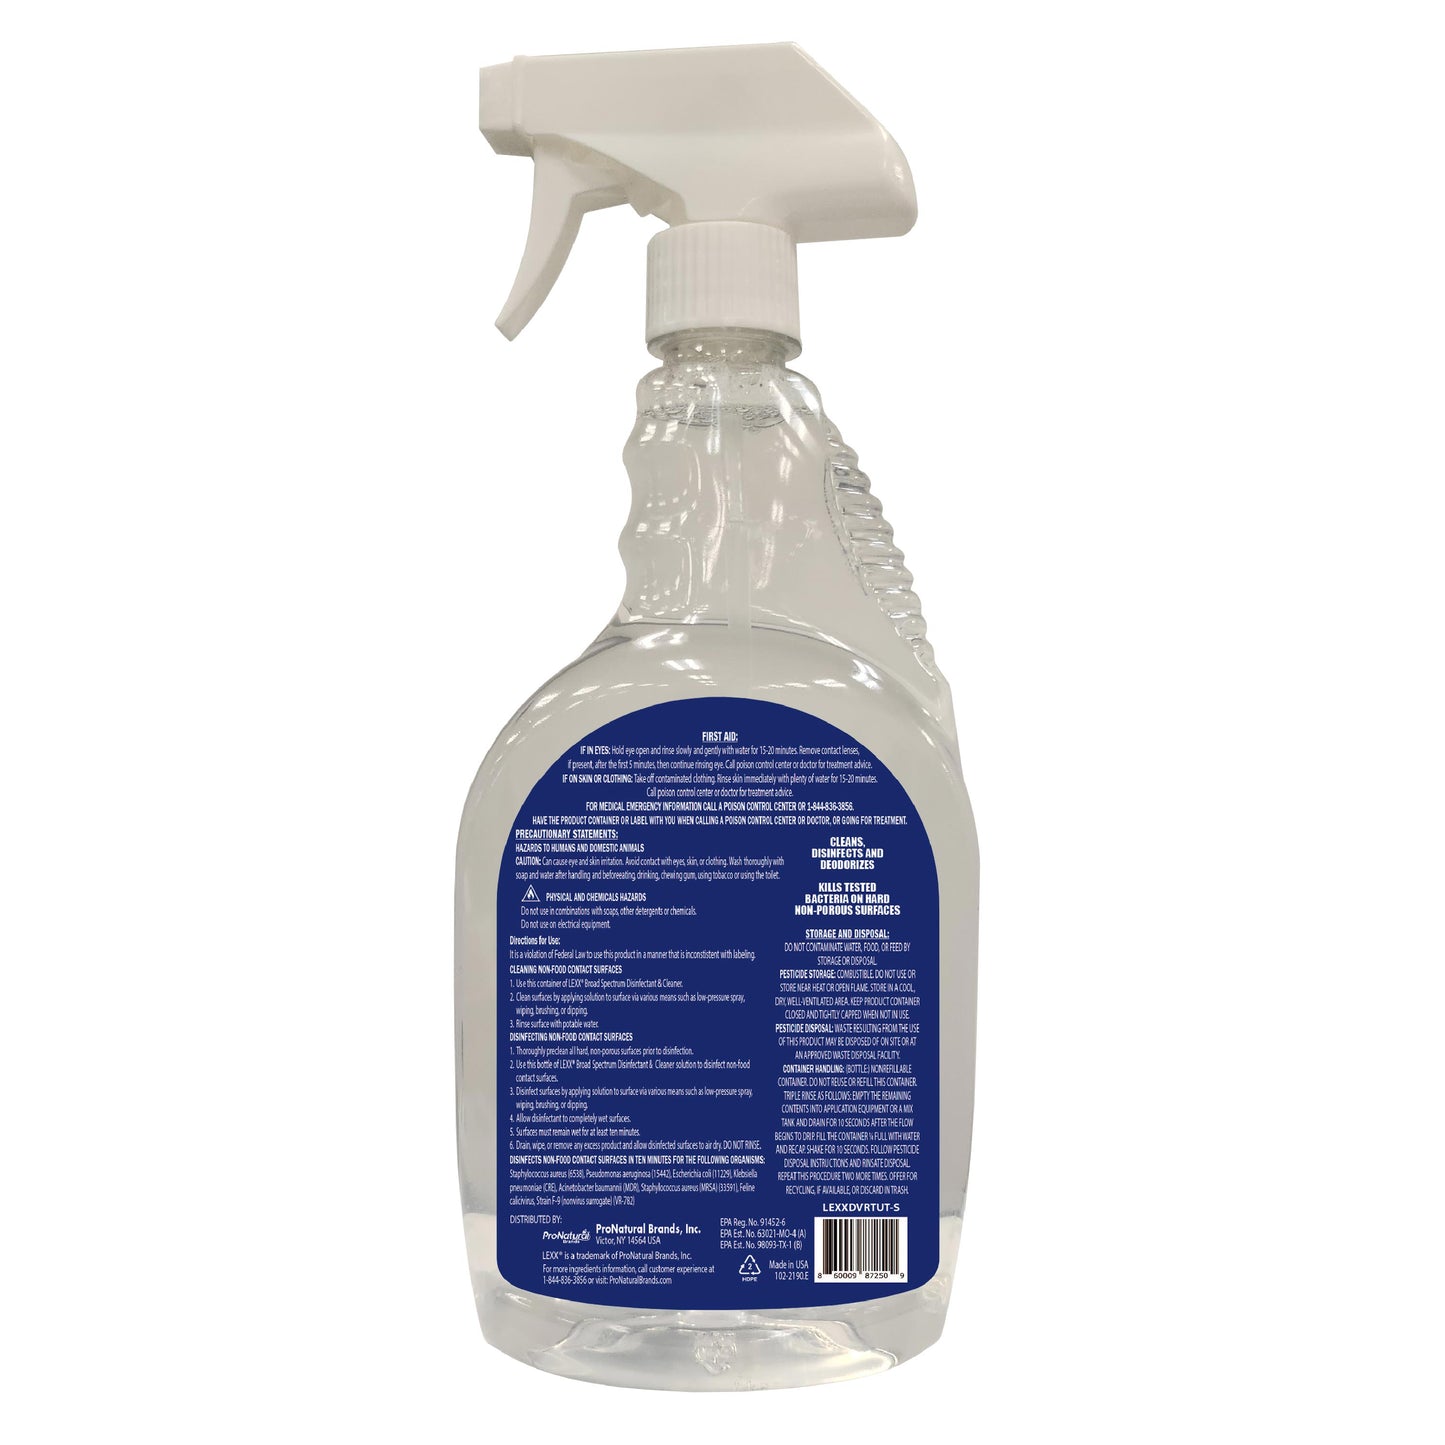 LEXX Liquid Disinfectant and Cleaner Ready to Use Solution (RTU) - Vanilla Scented (Case of 4)